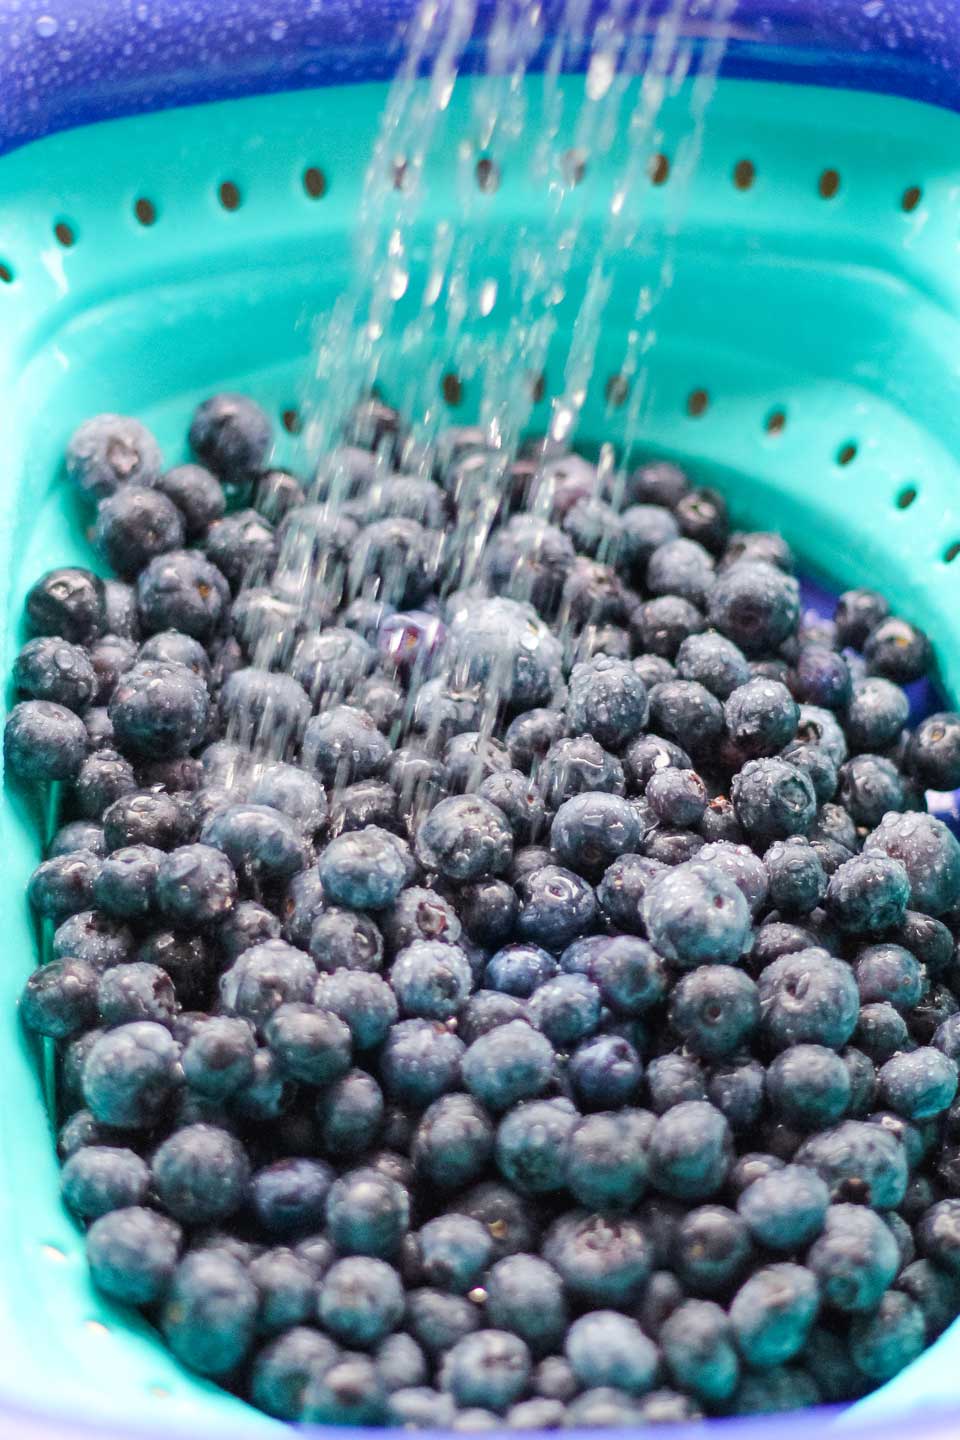 Big pile of fresh blueberries in a turquoise and blue strainer, being rinsed under a stream of water.